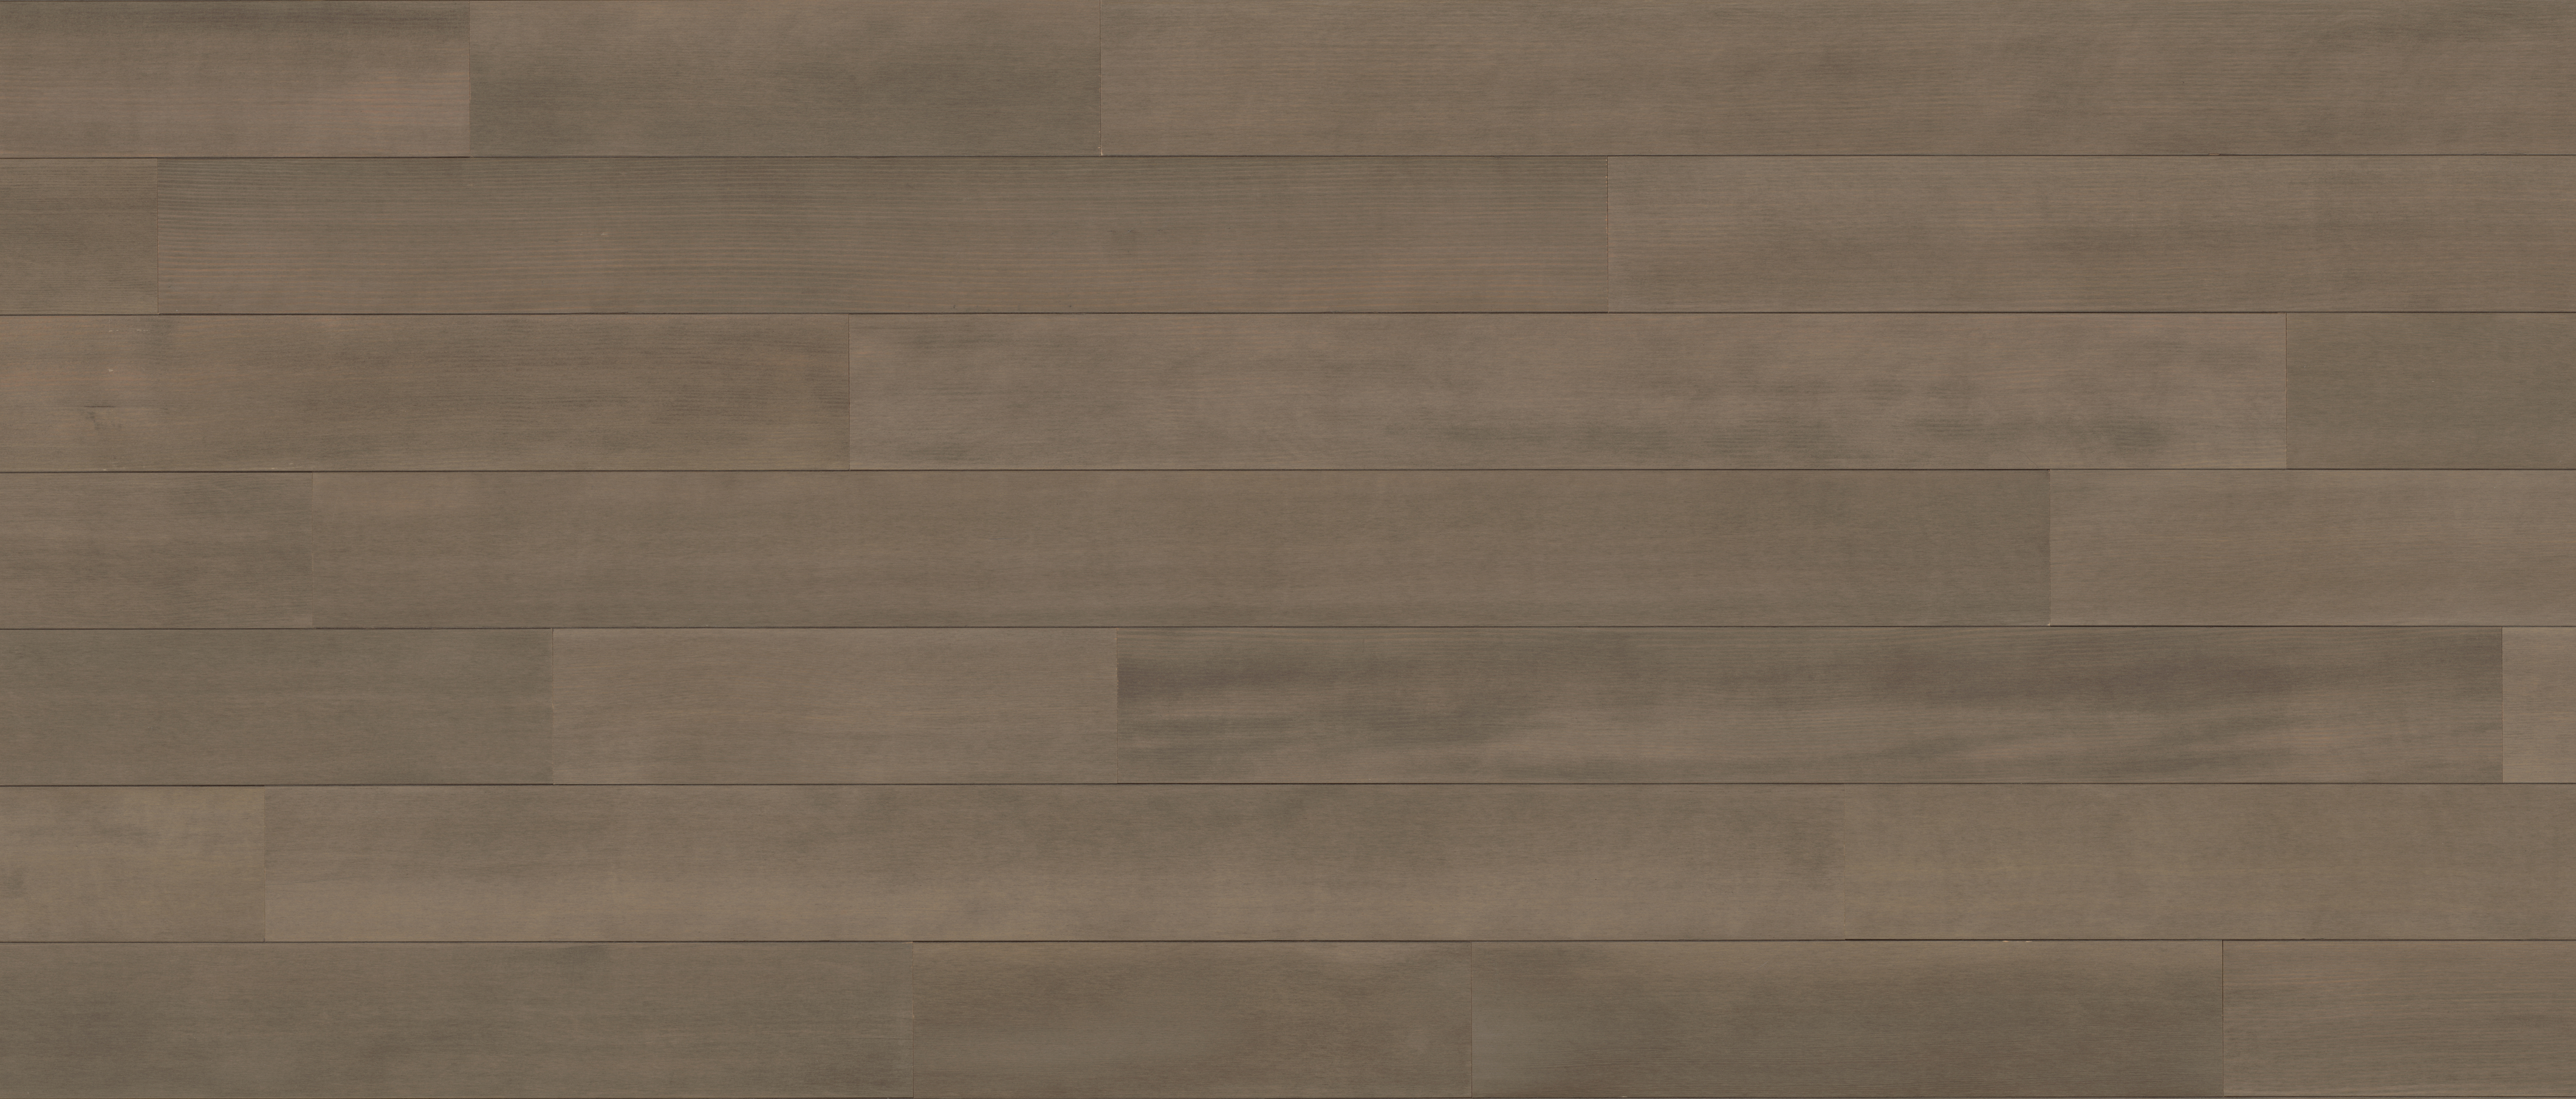 Stikwood Vertical Grain Rustic Slate material explorer | real vertical grain douglas fir peel and stick wood wall and ceiling planks with gray, green, tan with warm wood tone colors.